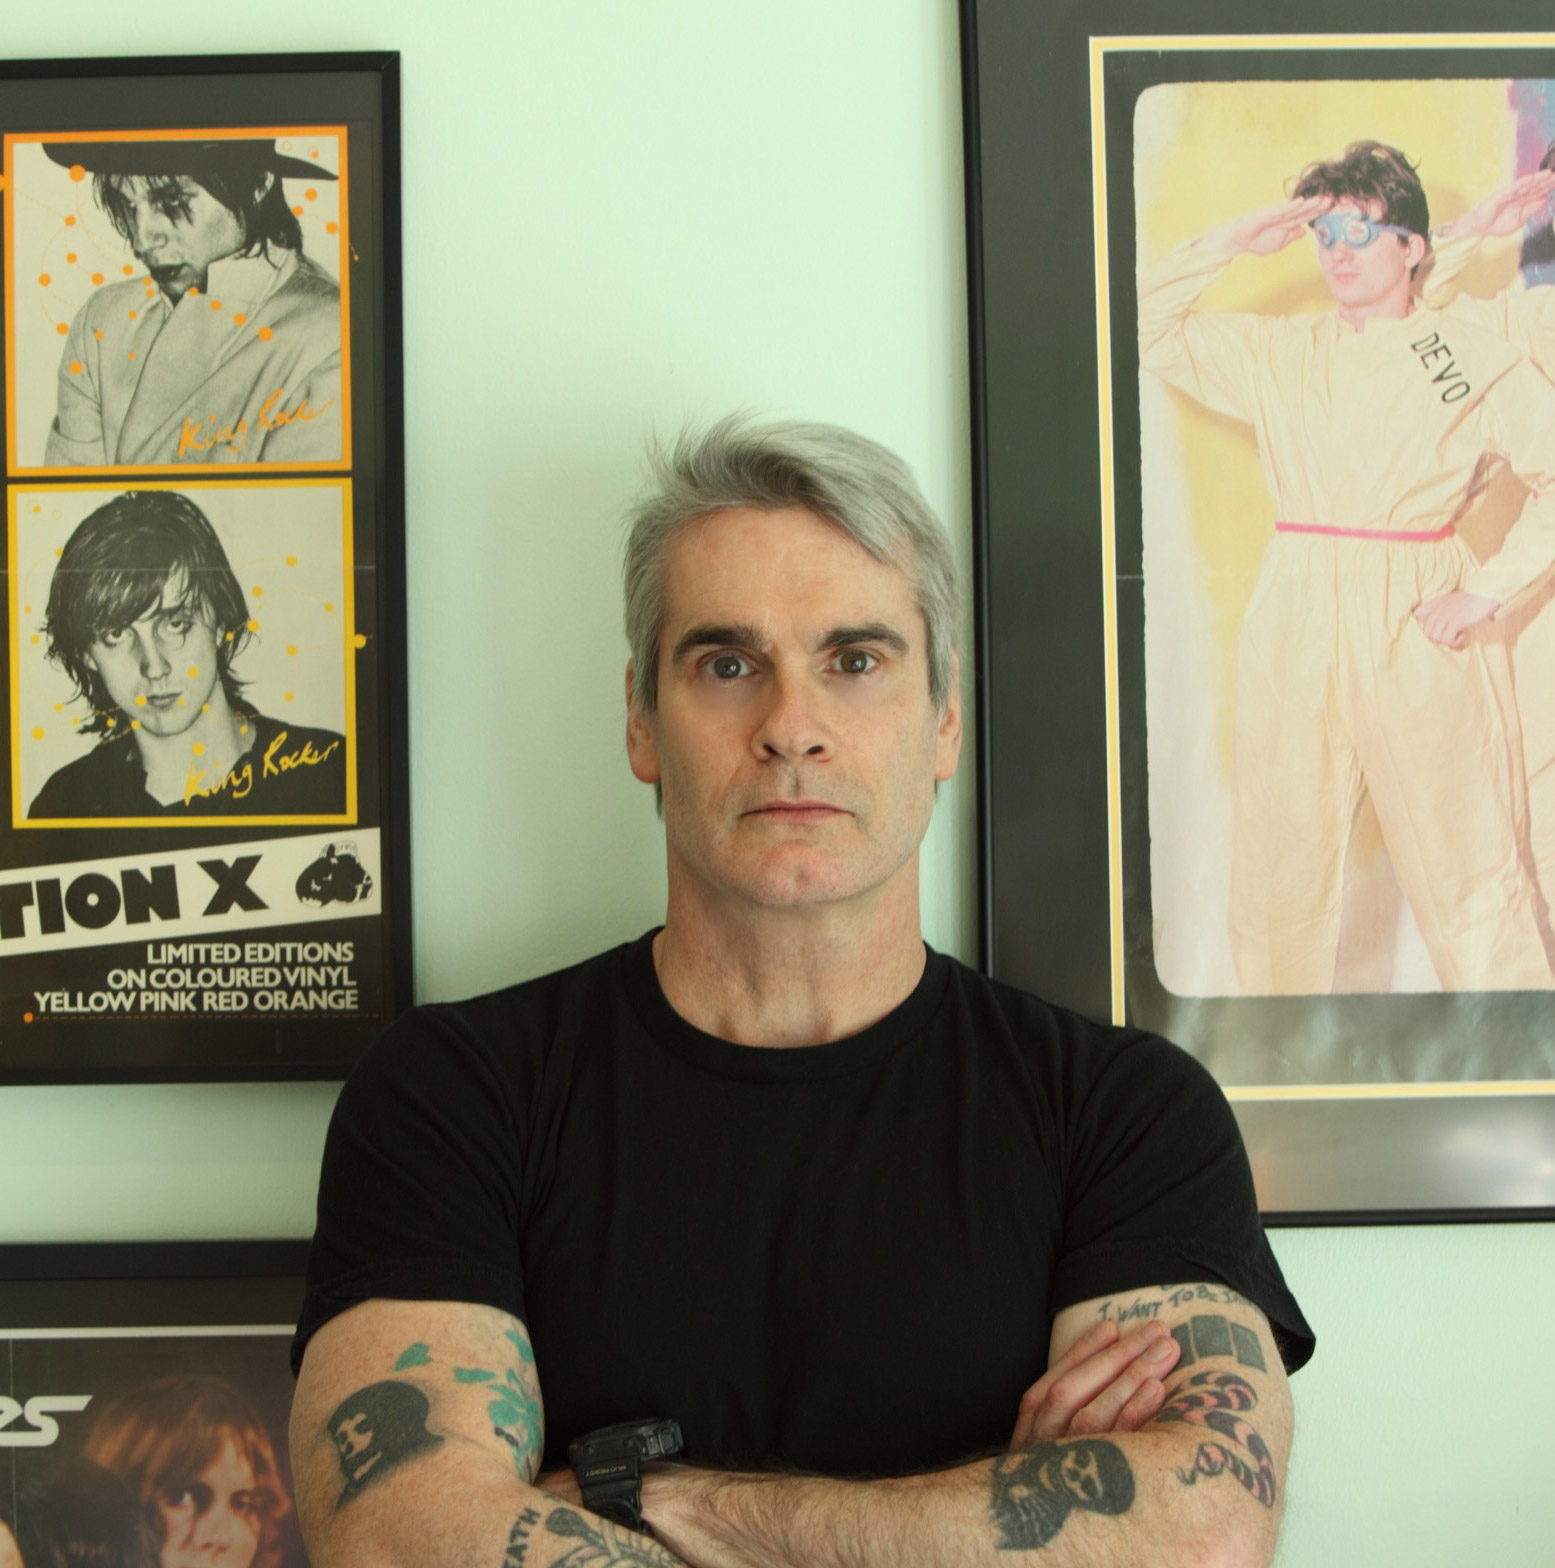 Henry Rollins photo by Heidi May